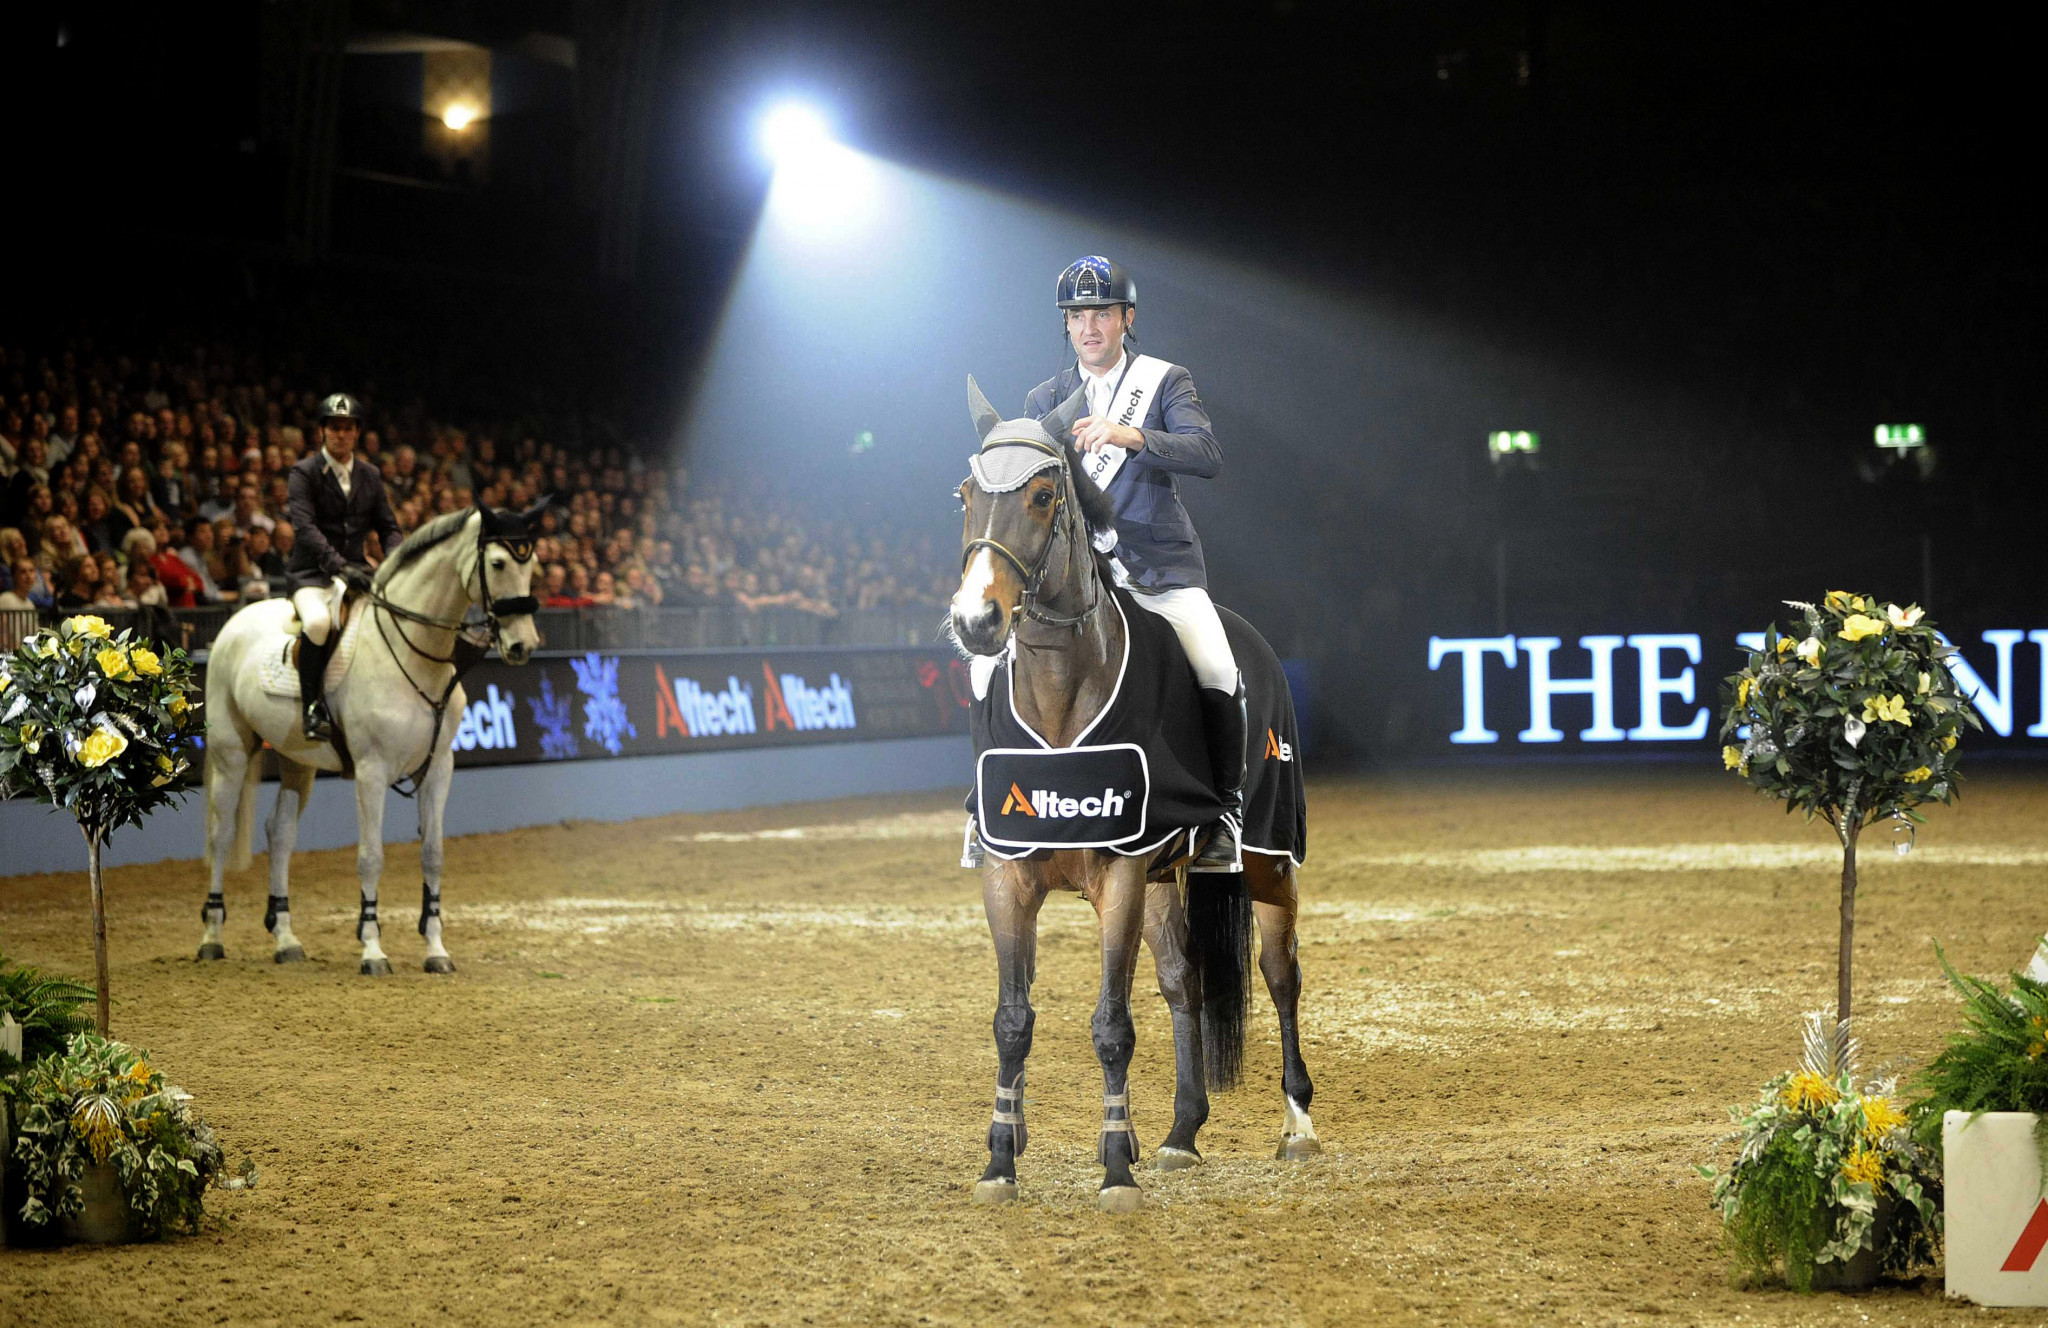 London International Horse Show to go ahead after COVID-19-enforced cancellation in Liverpool